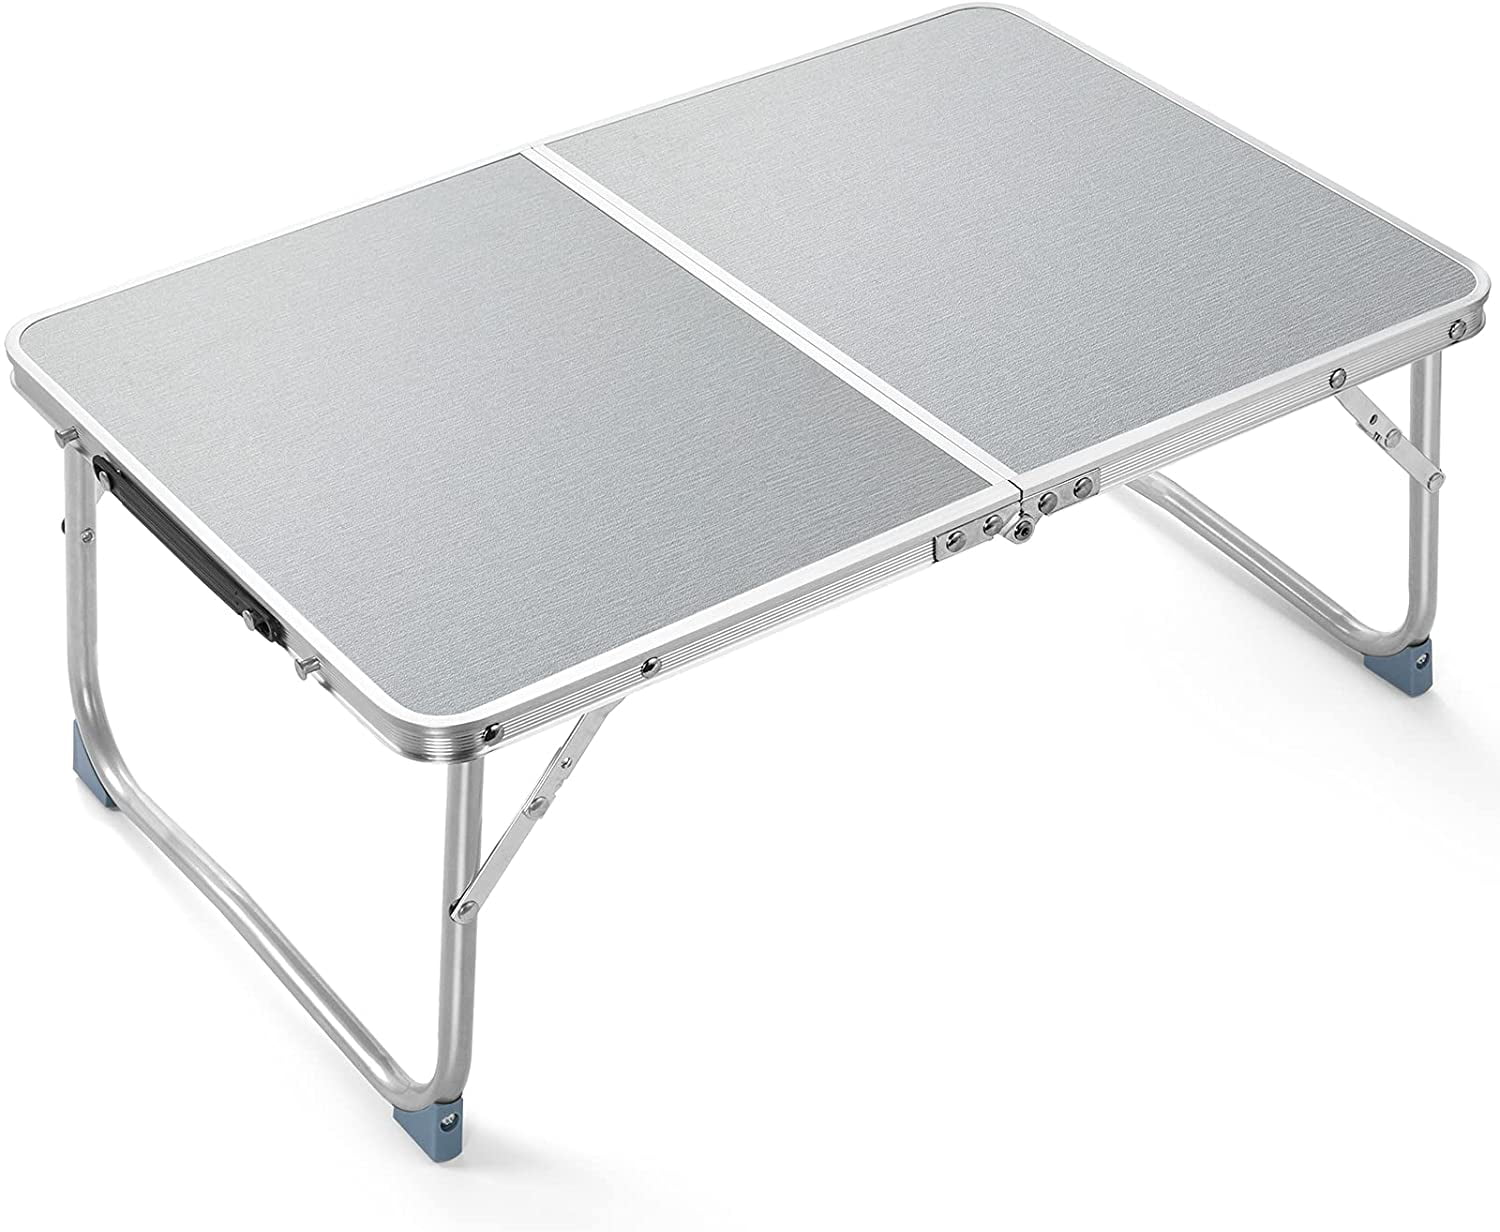 Folding Table Portable Camping Picnic Exhibitions BBQ Laptop Table Tray Aluminum 